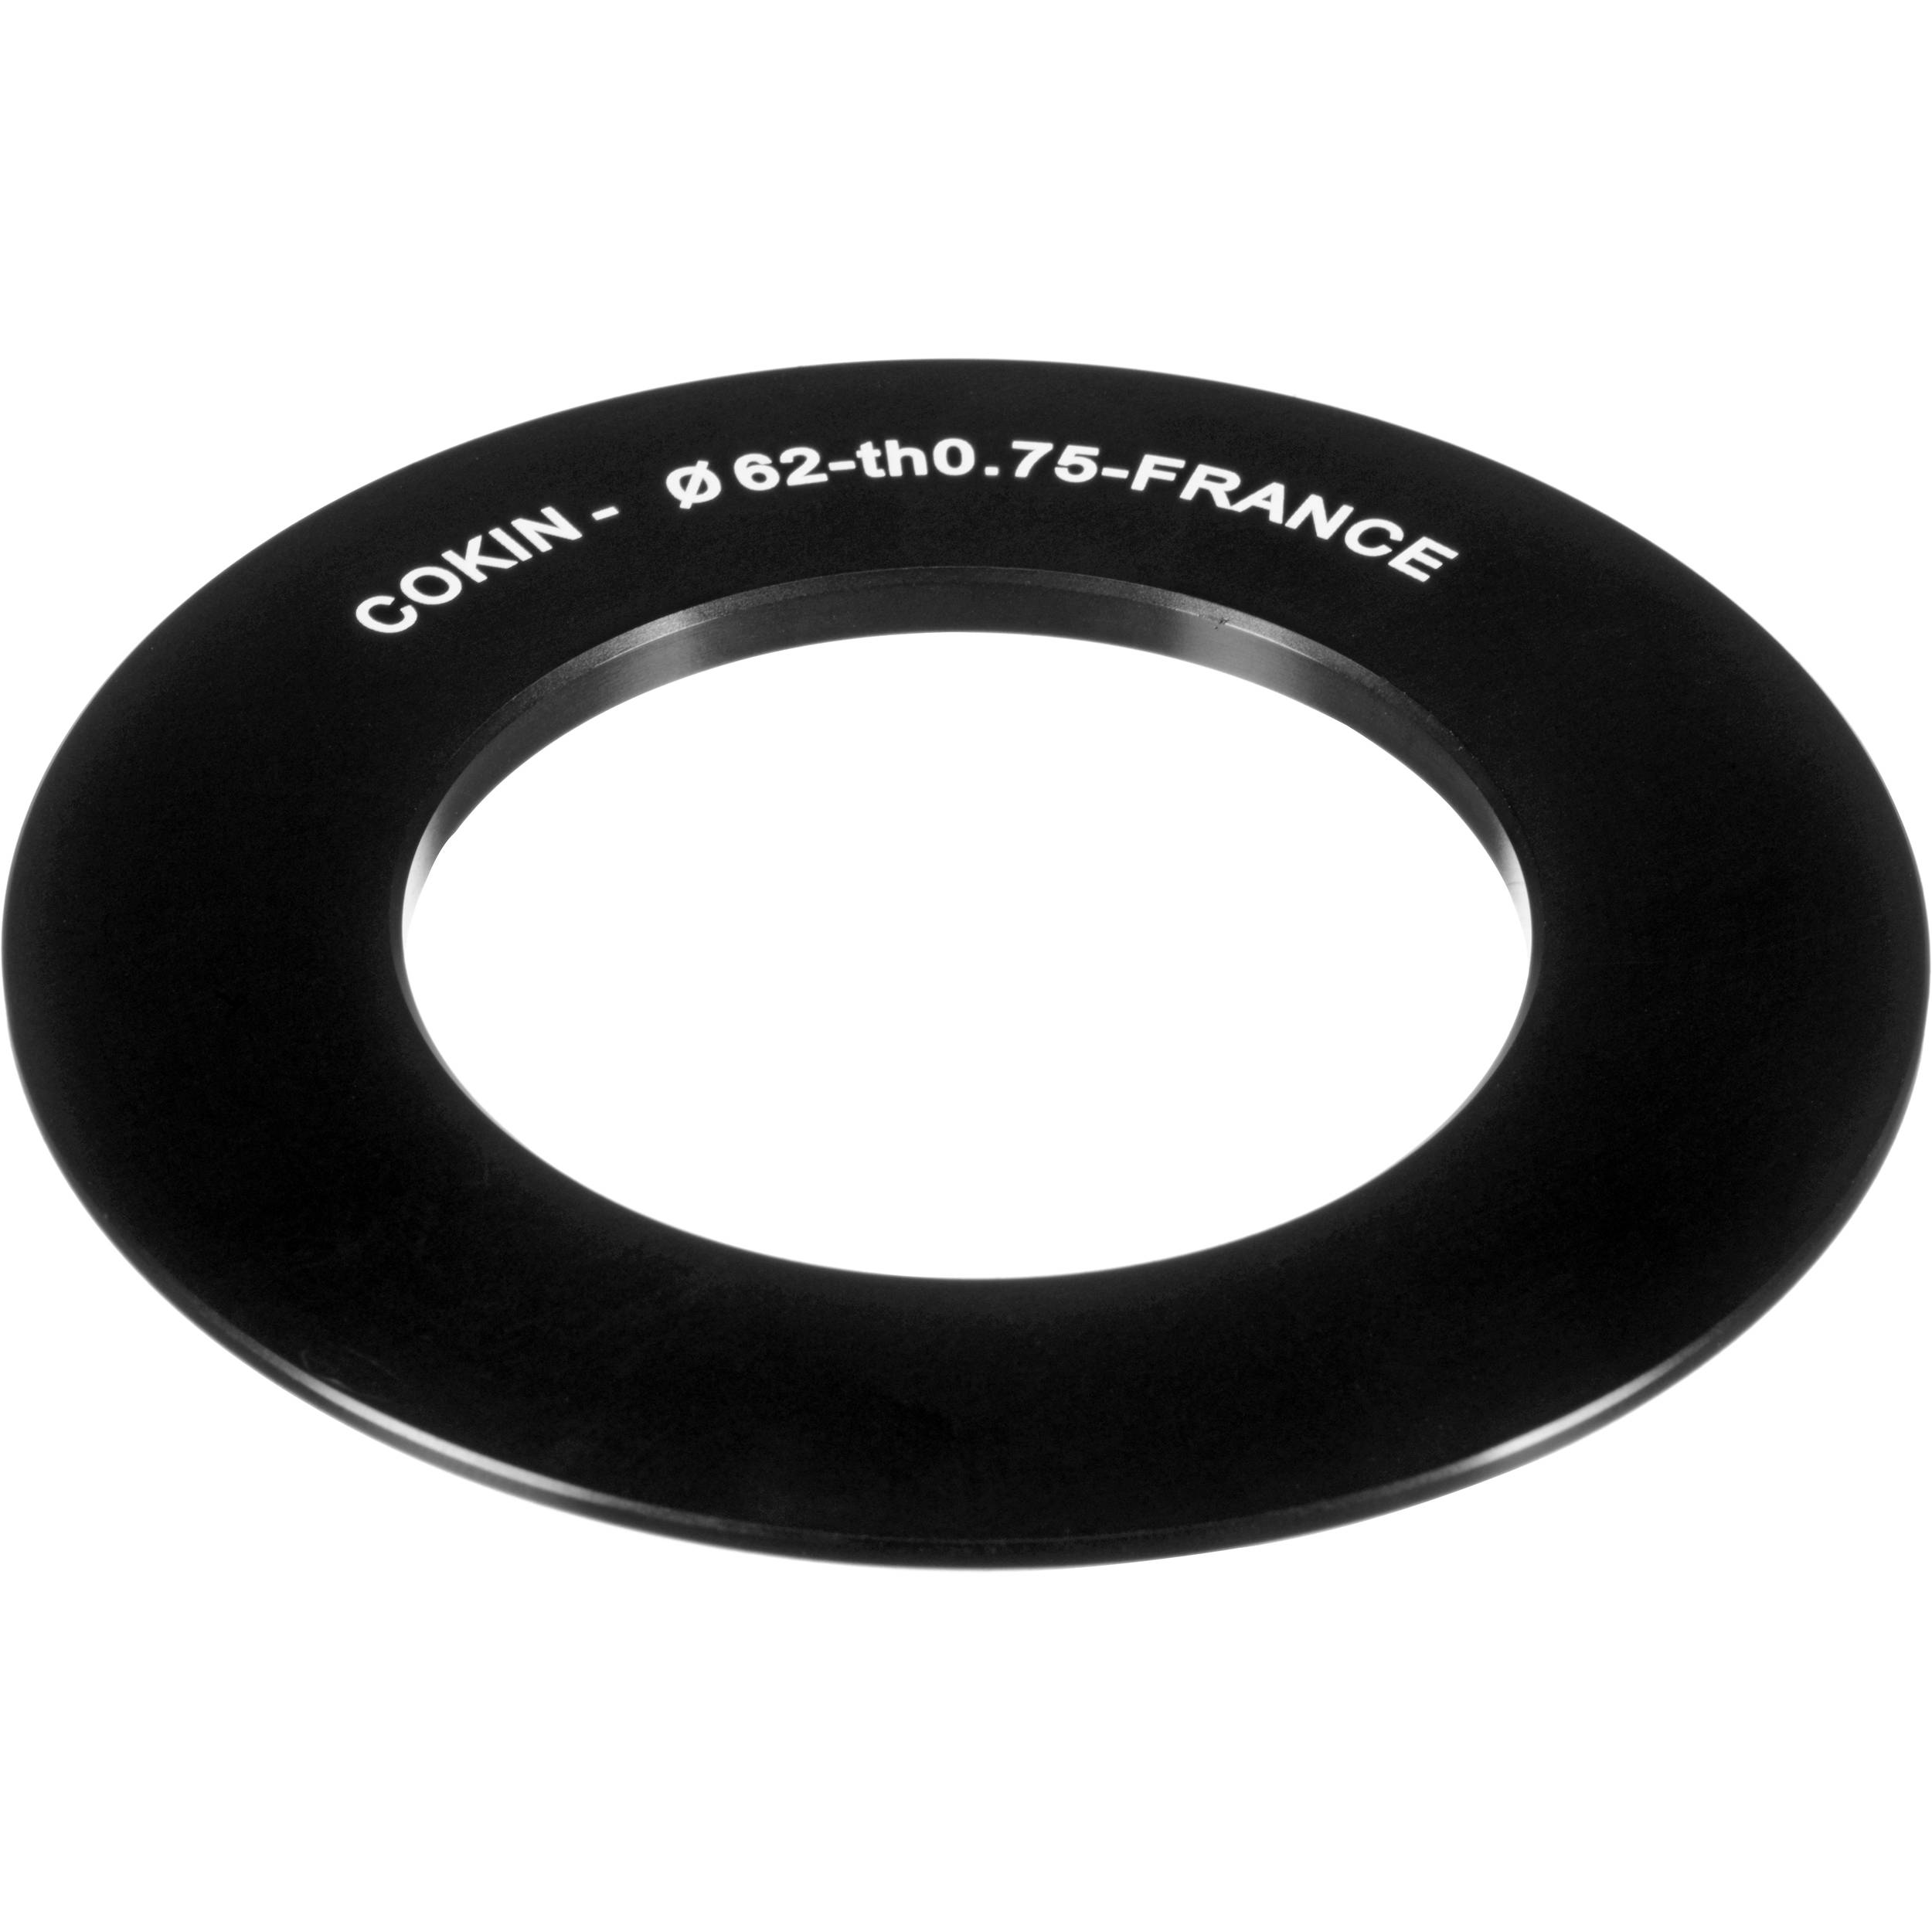 Cokin Z Pro Series Filter Holder Adapter Ring 62mm Cz462 B H The filter holder system can be attached and removed in 3 simple steps. cokin z pro series filter holder adapter ring 62mm